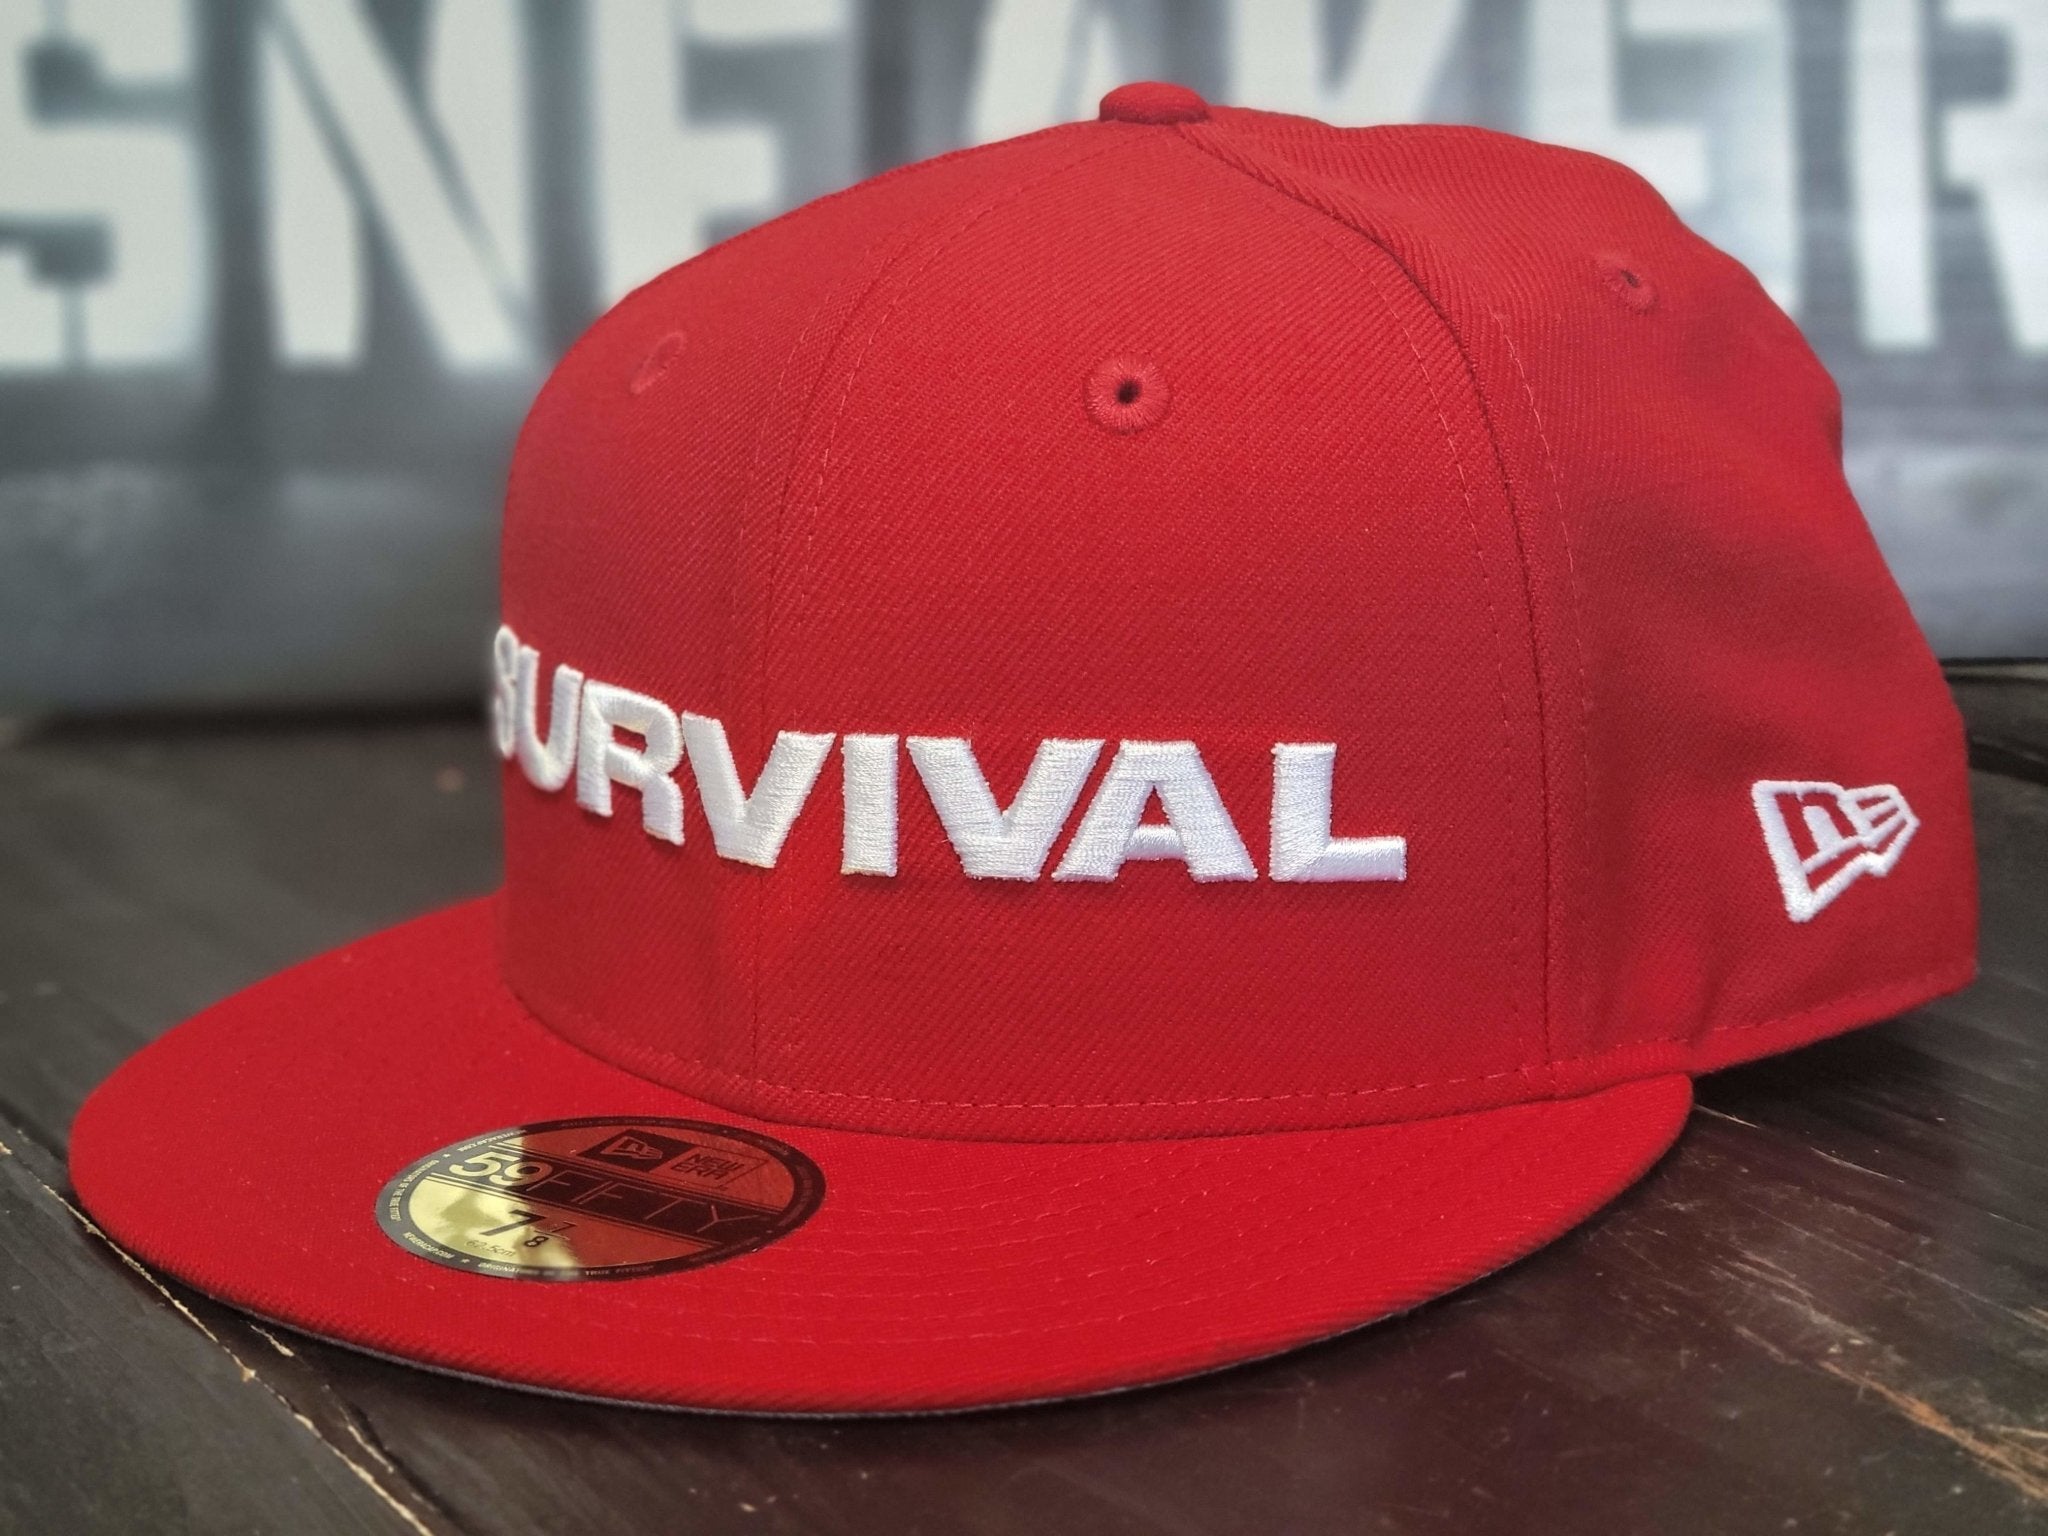 New Era x Dave East FTD Survival Red/White Fitted Hat Men 7 7/8